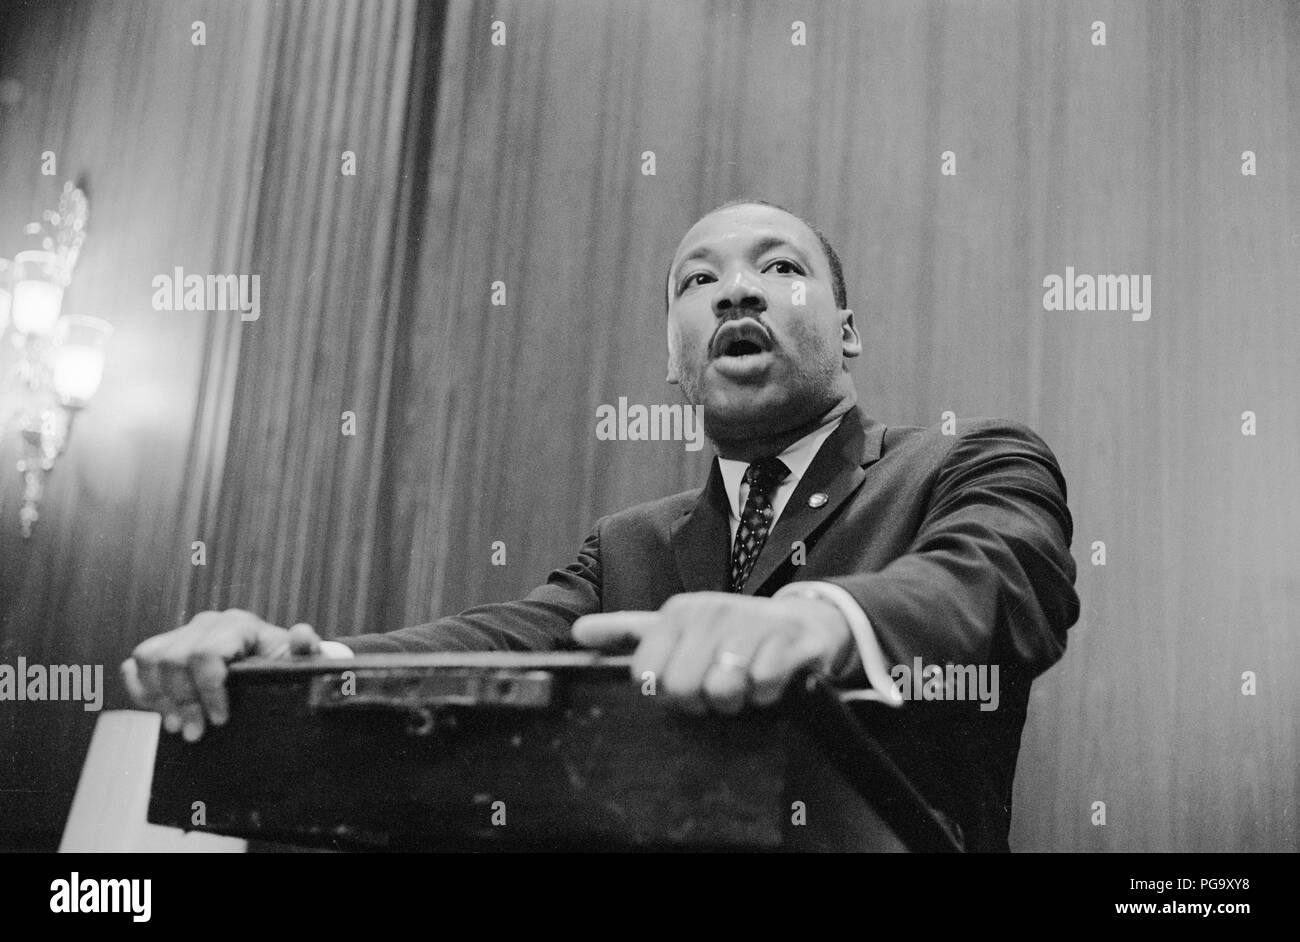 Martin Luther King Jr. - March, 1964 Stock Photo